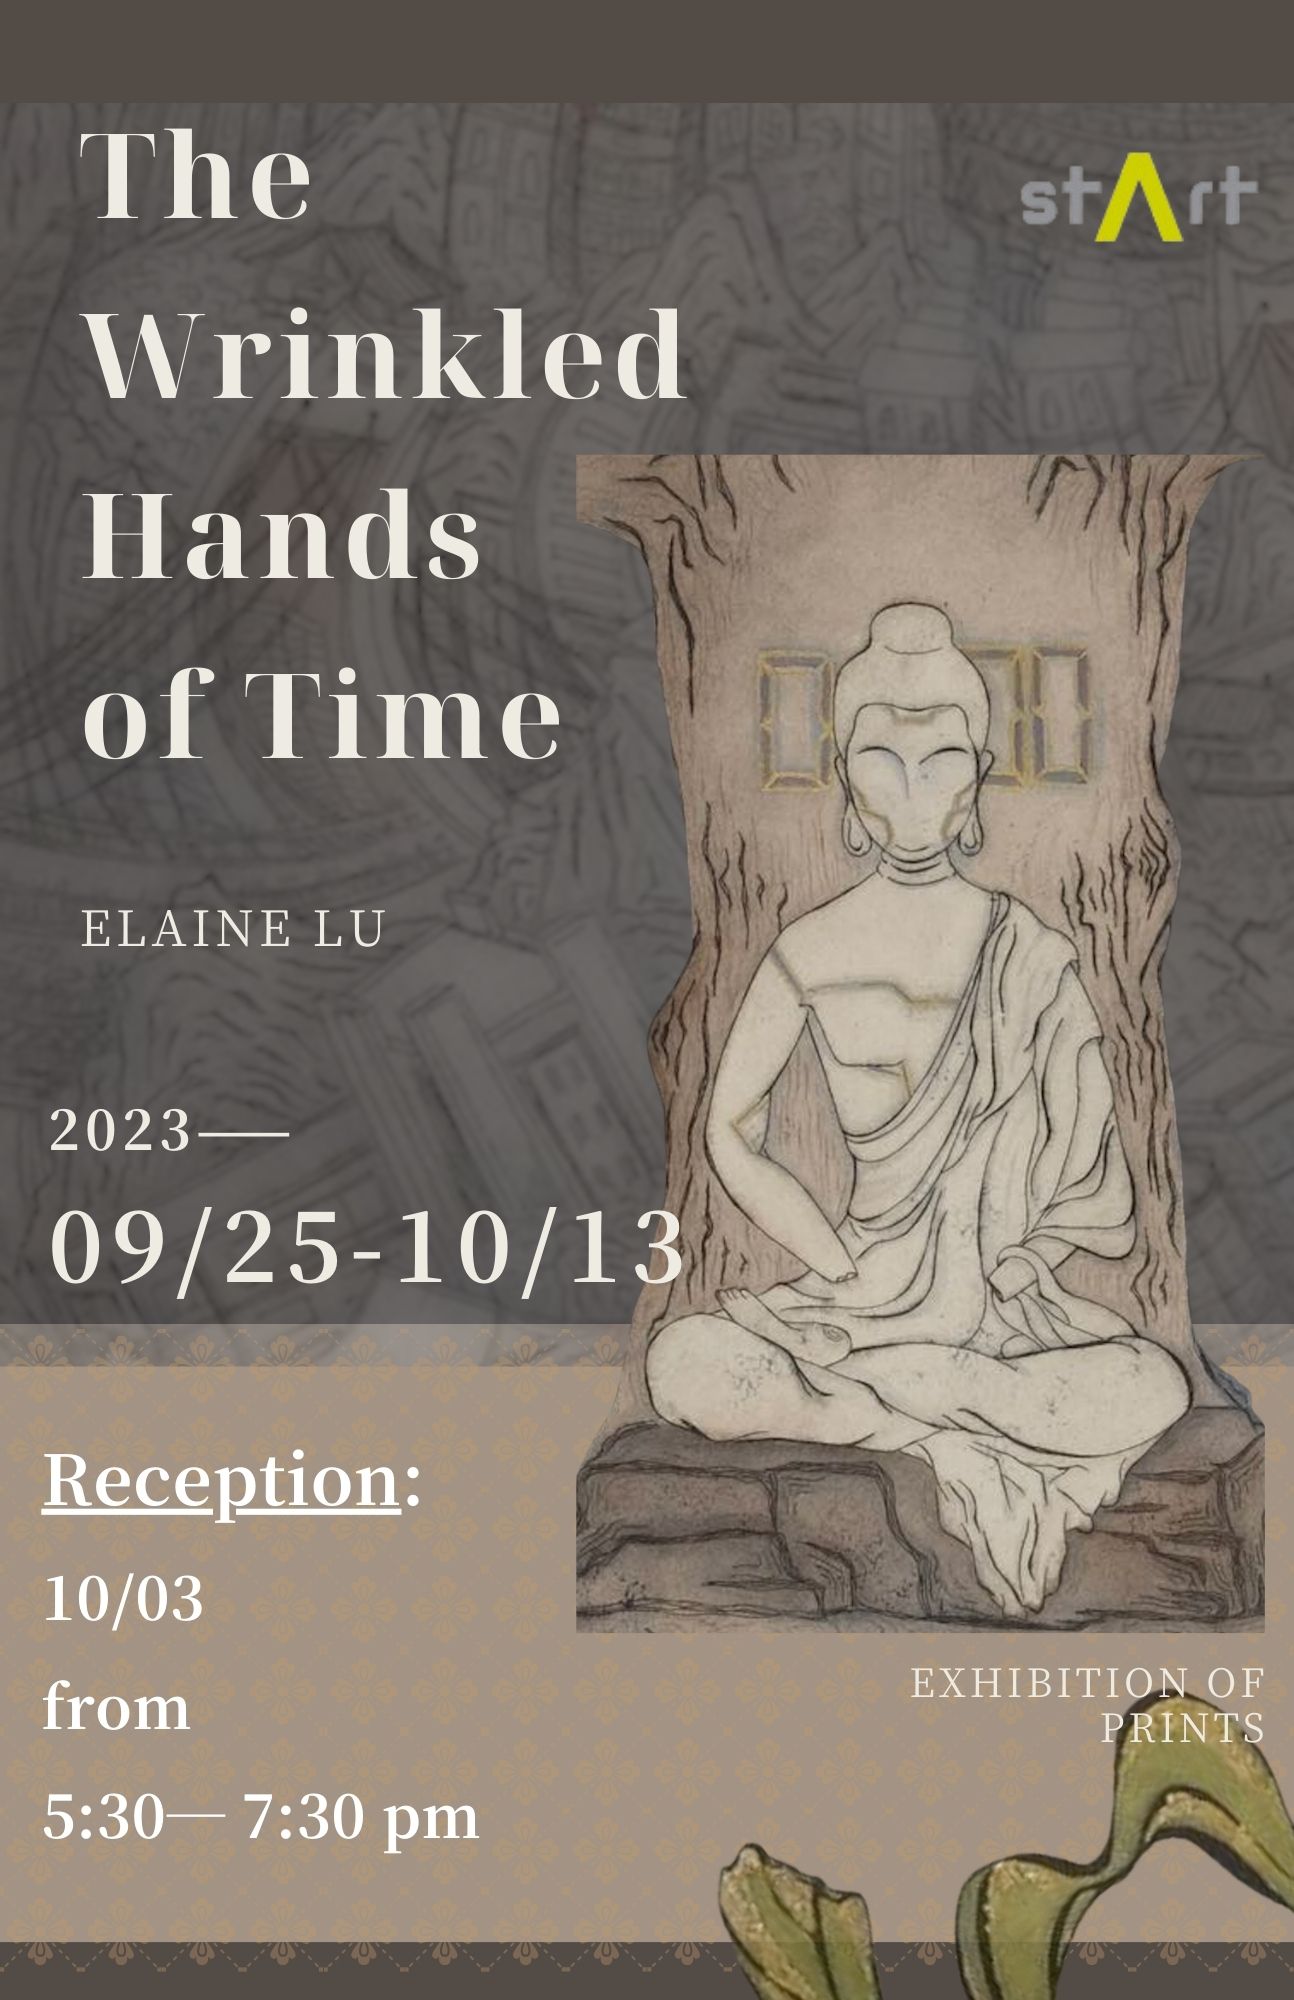 The Wrinkled Hands of Time